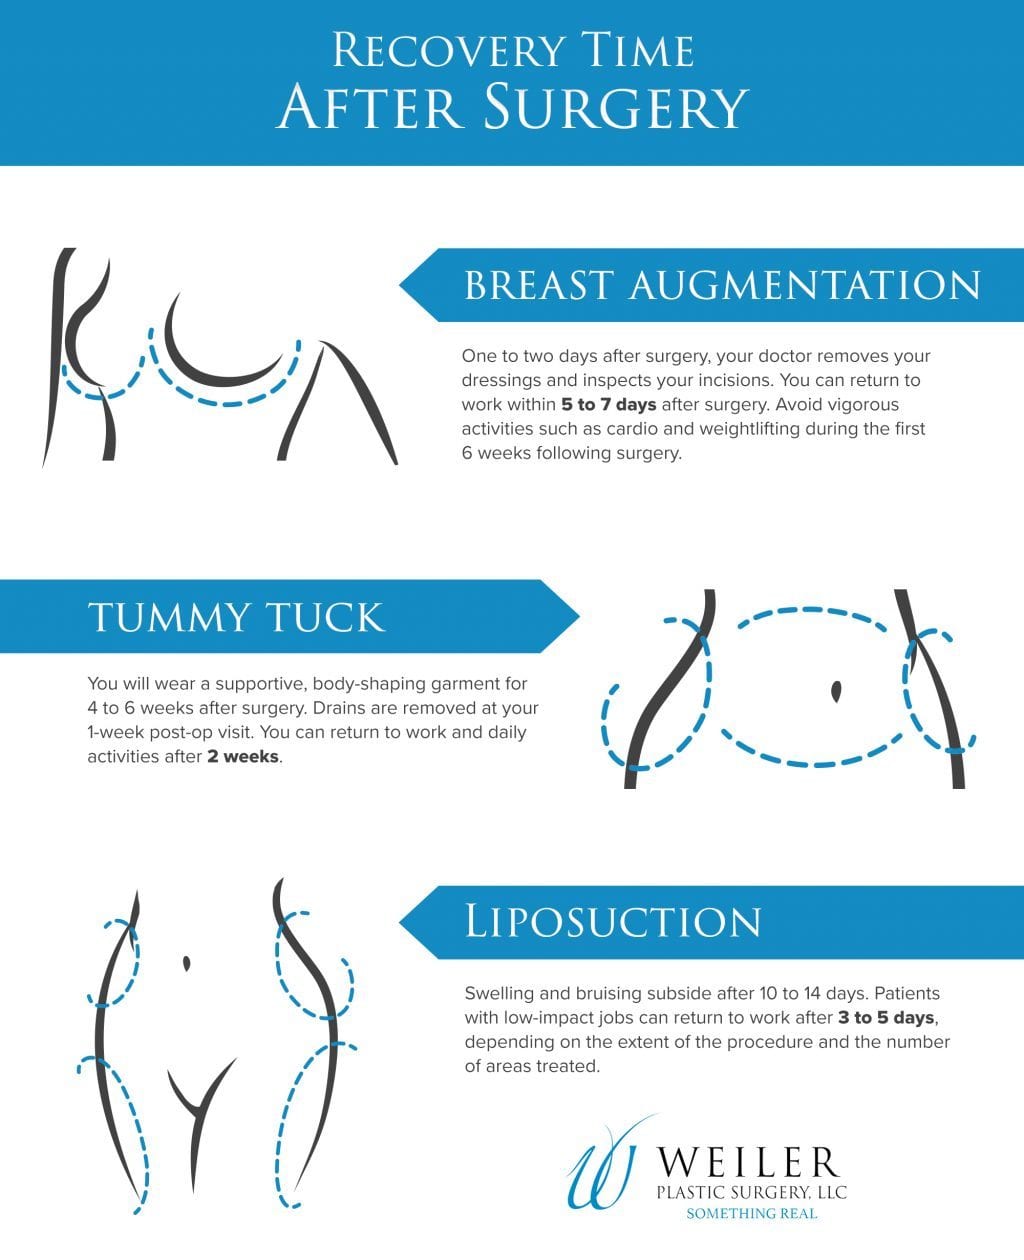 Recovery Time After Surgery: Breast Augmentation, Tummy Tuck, and Liposuction